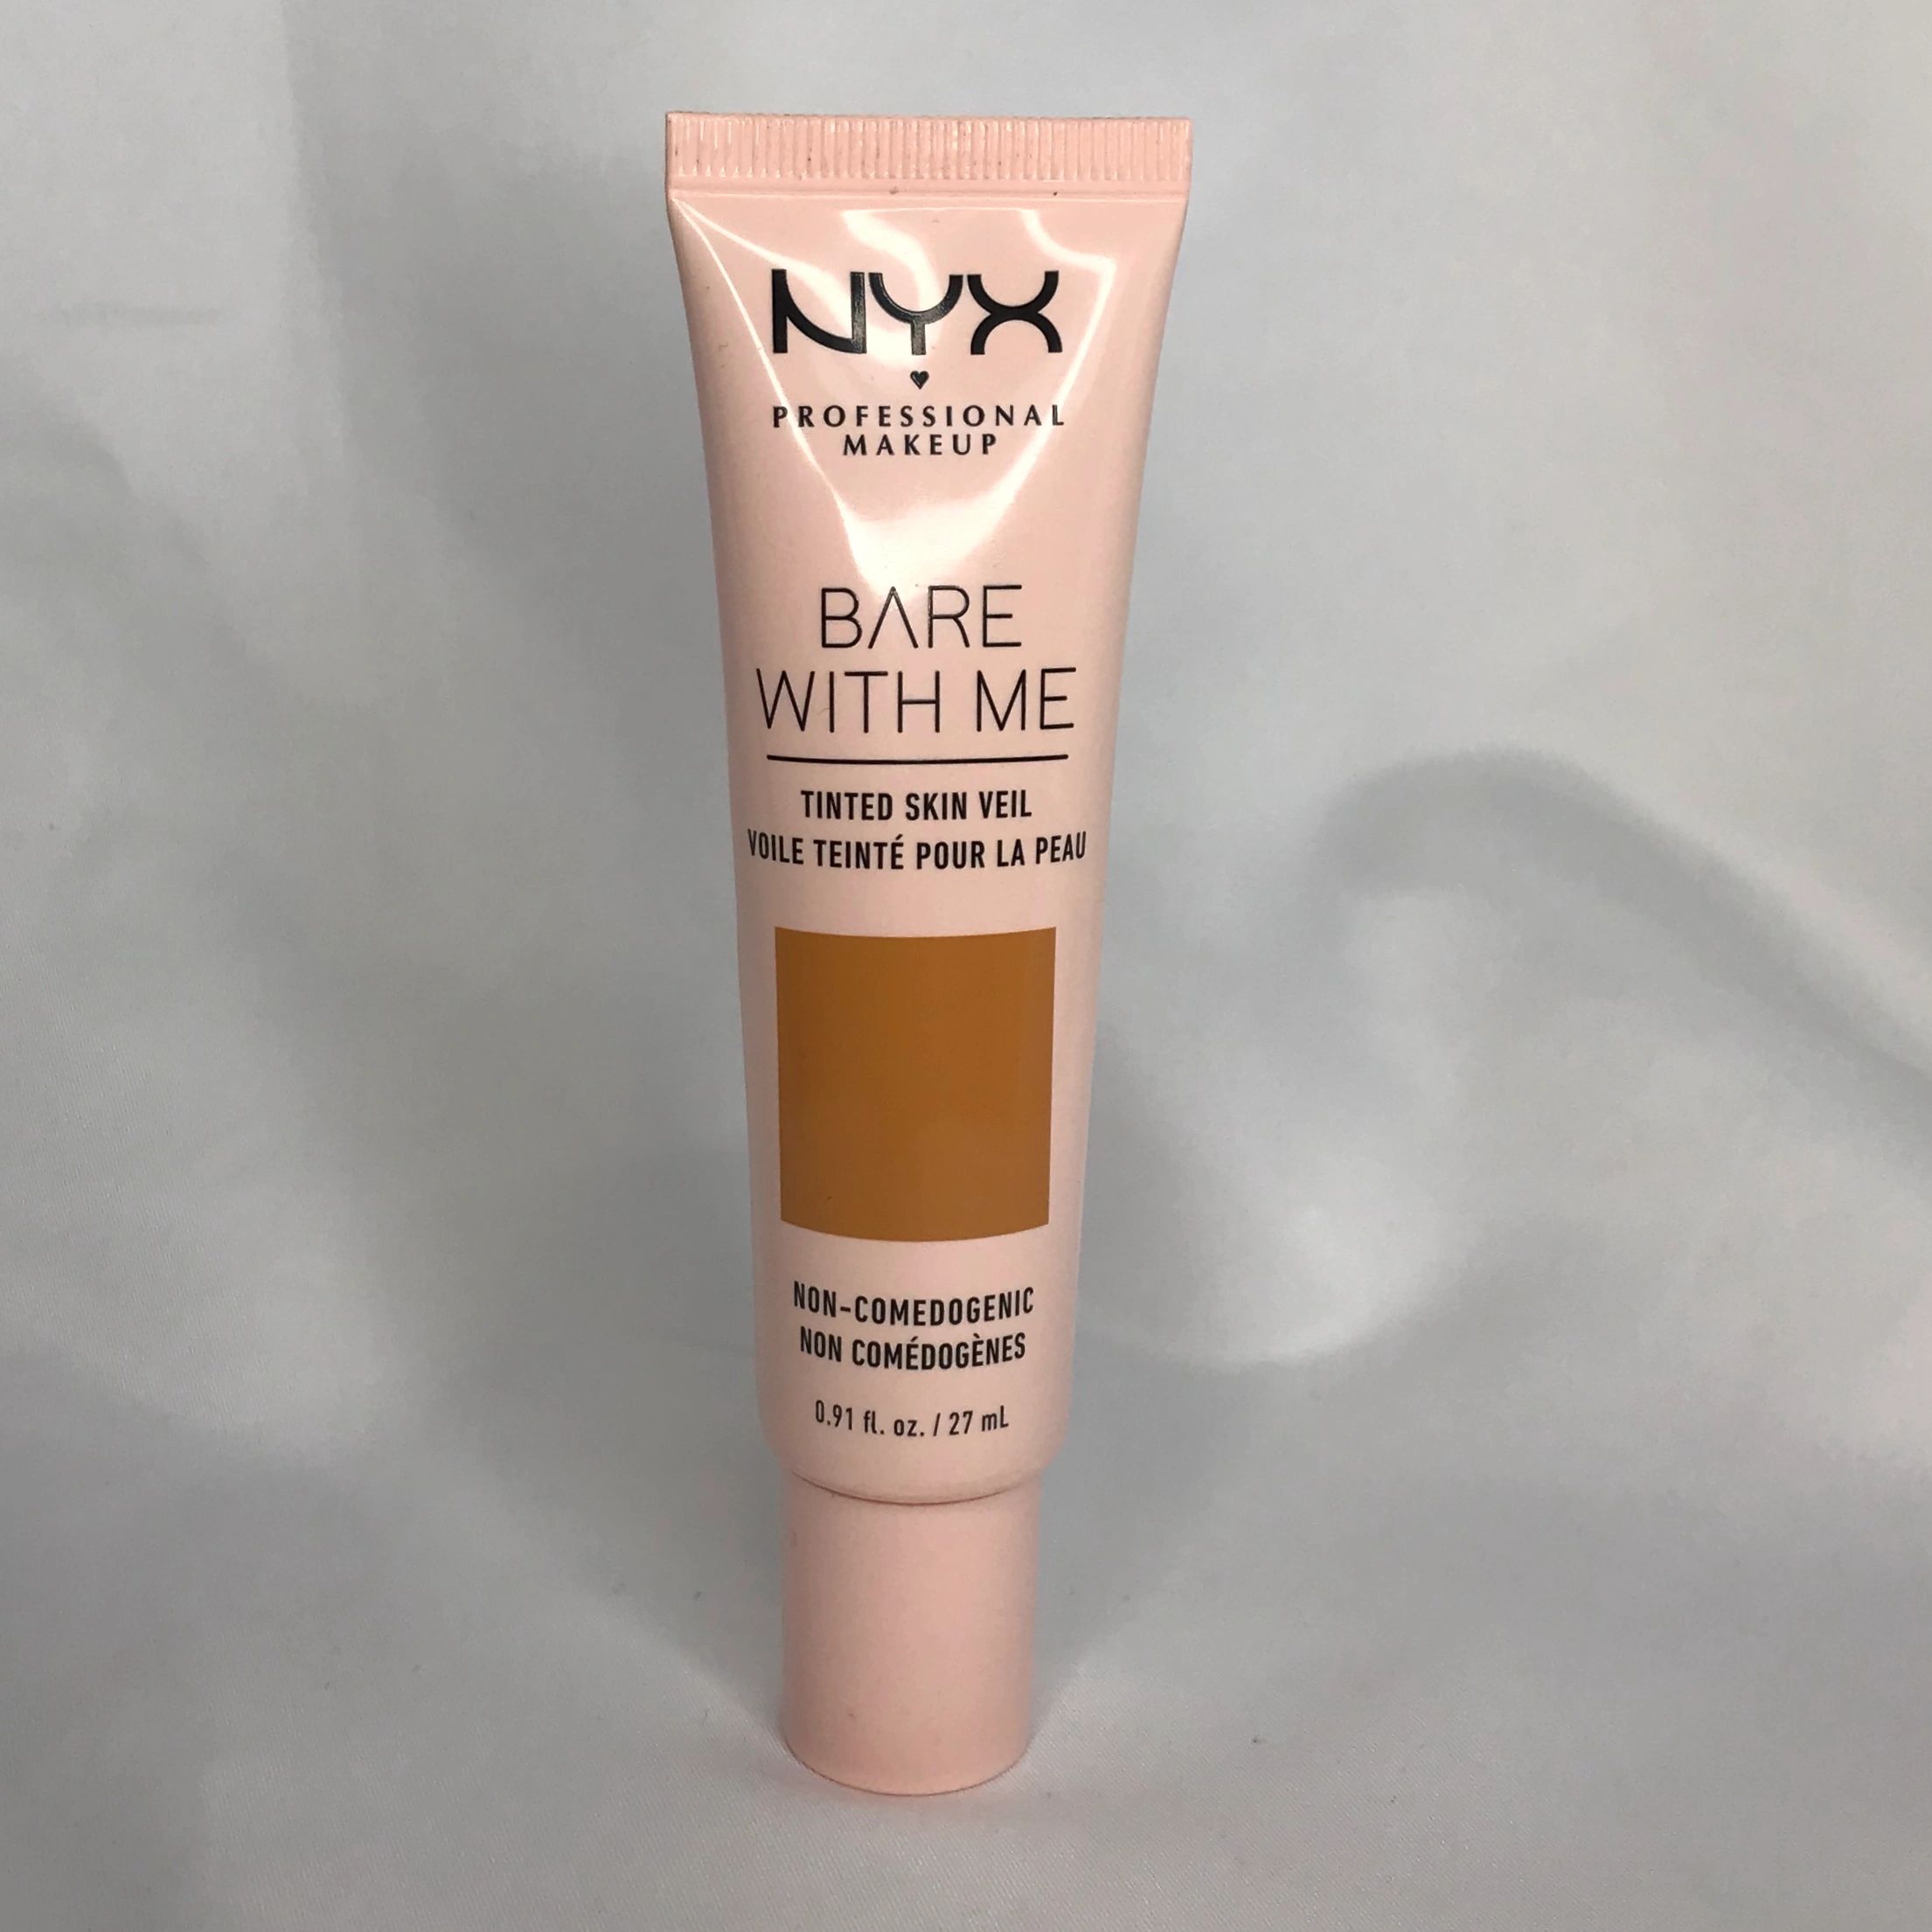 Bare with me by Nyx